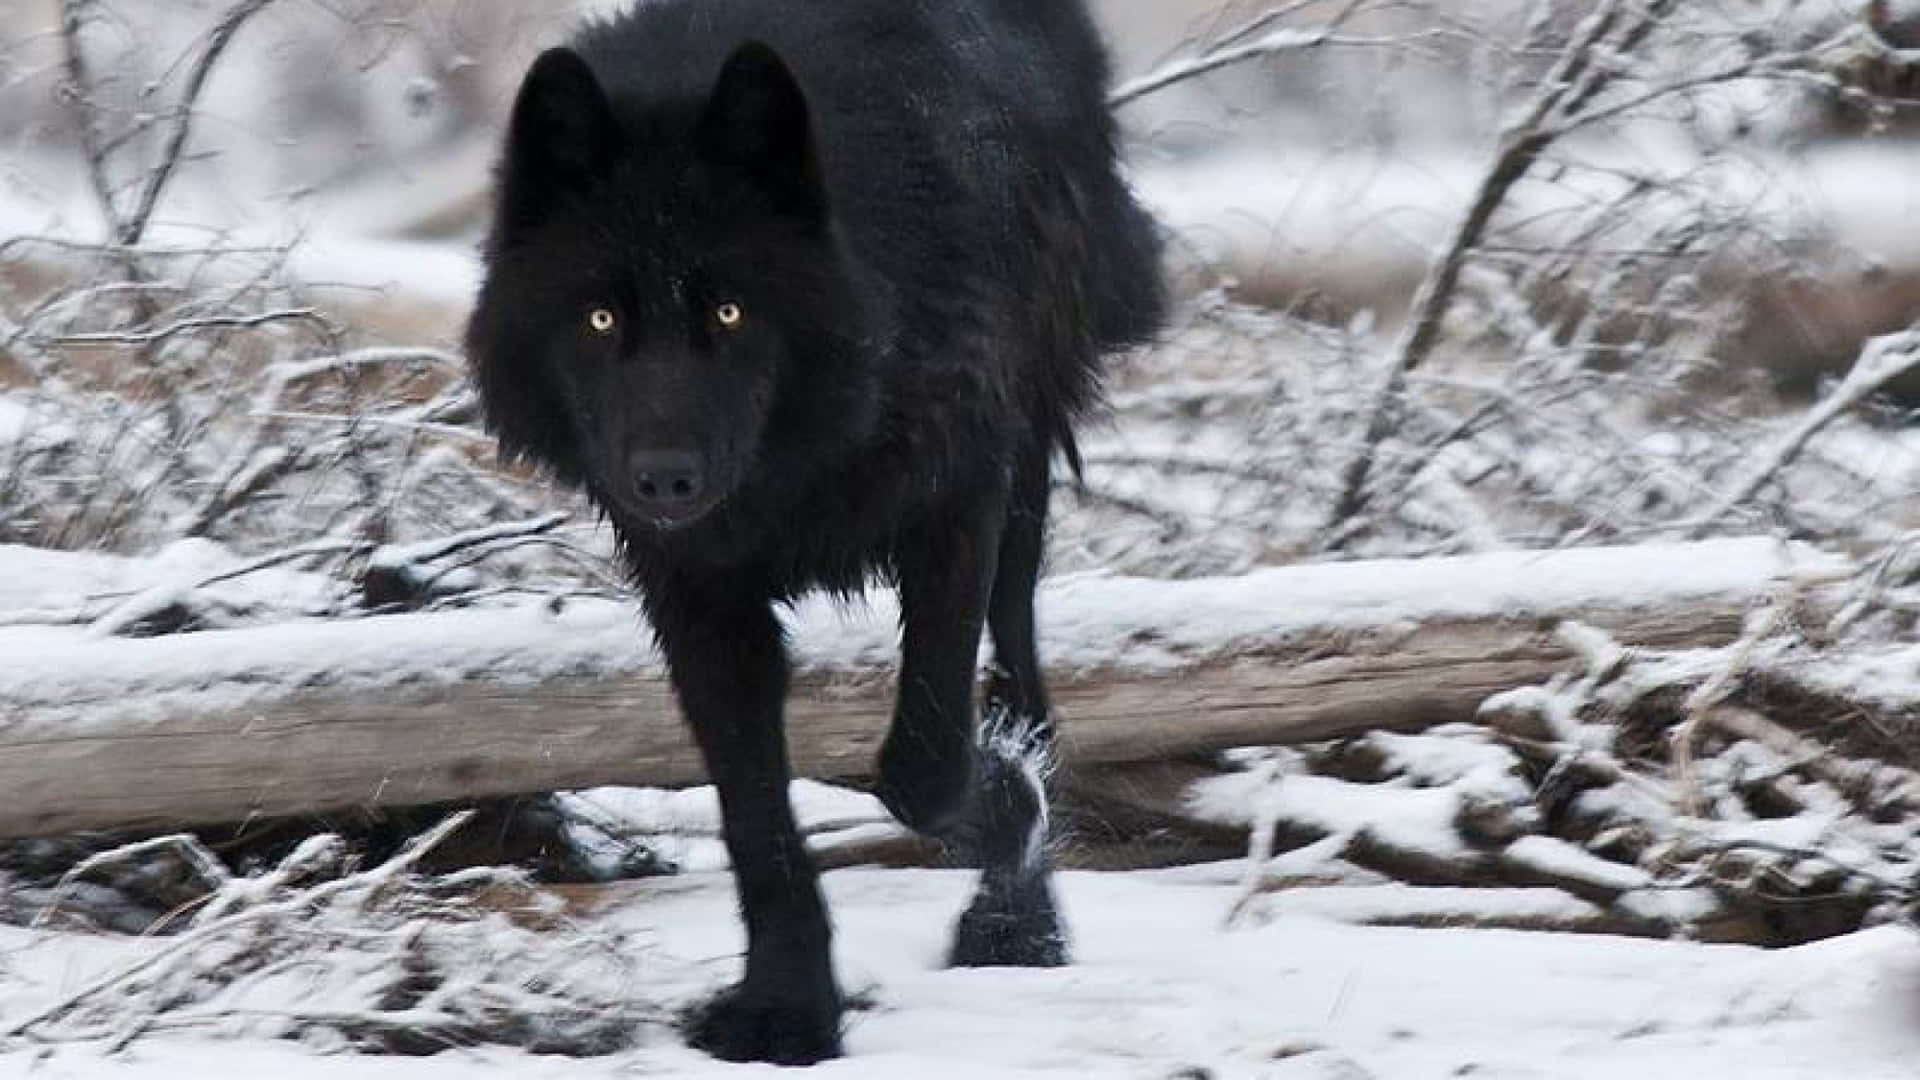 Deep in the shadows of the night, a solitary black wolf peers from the darkness.